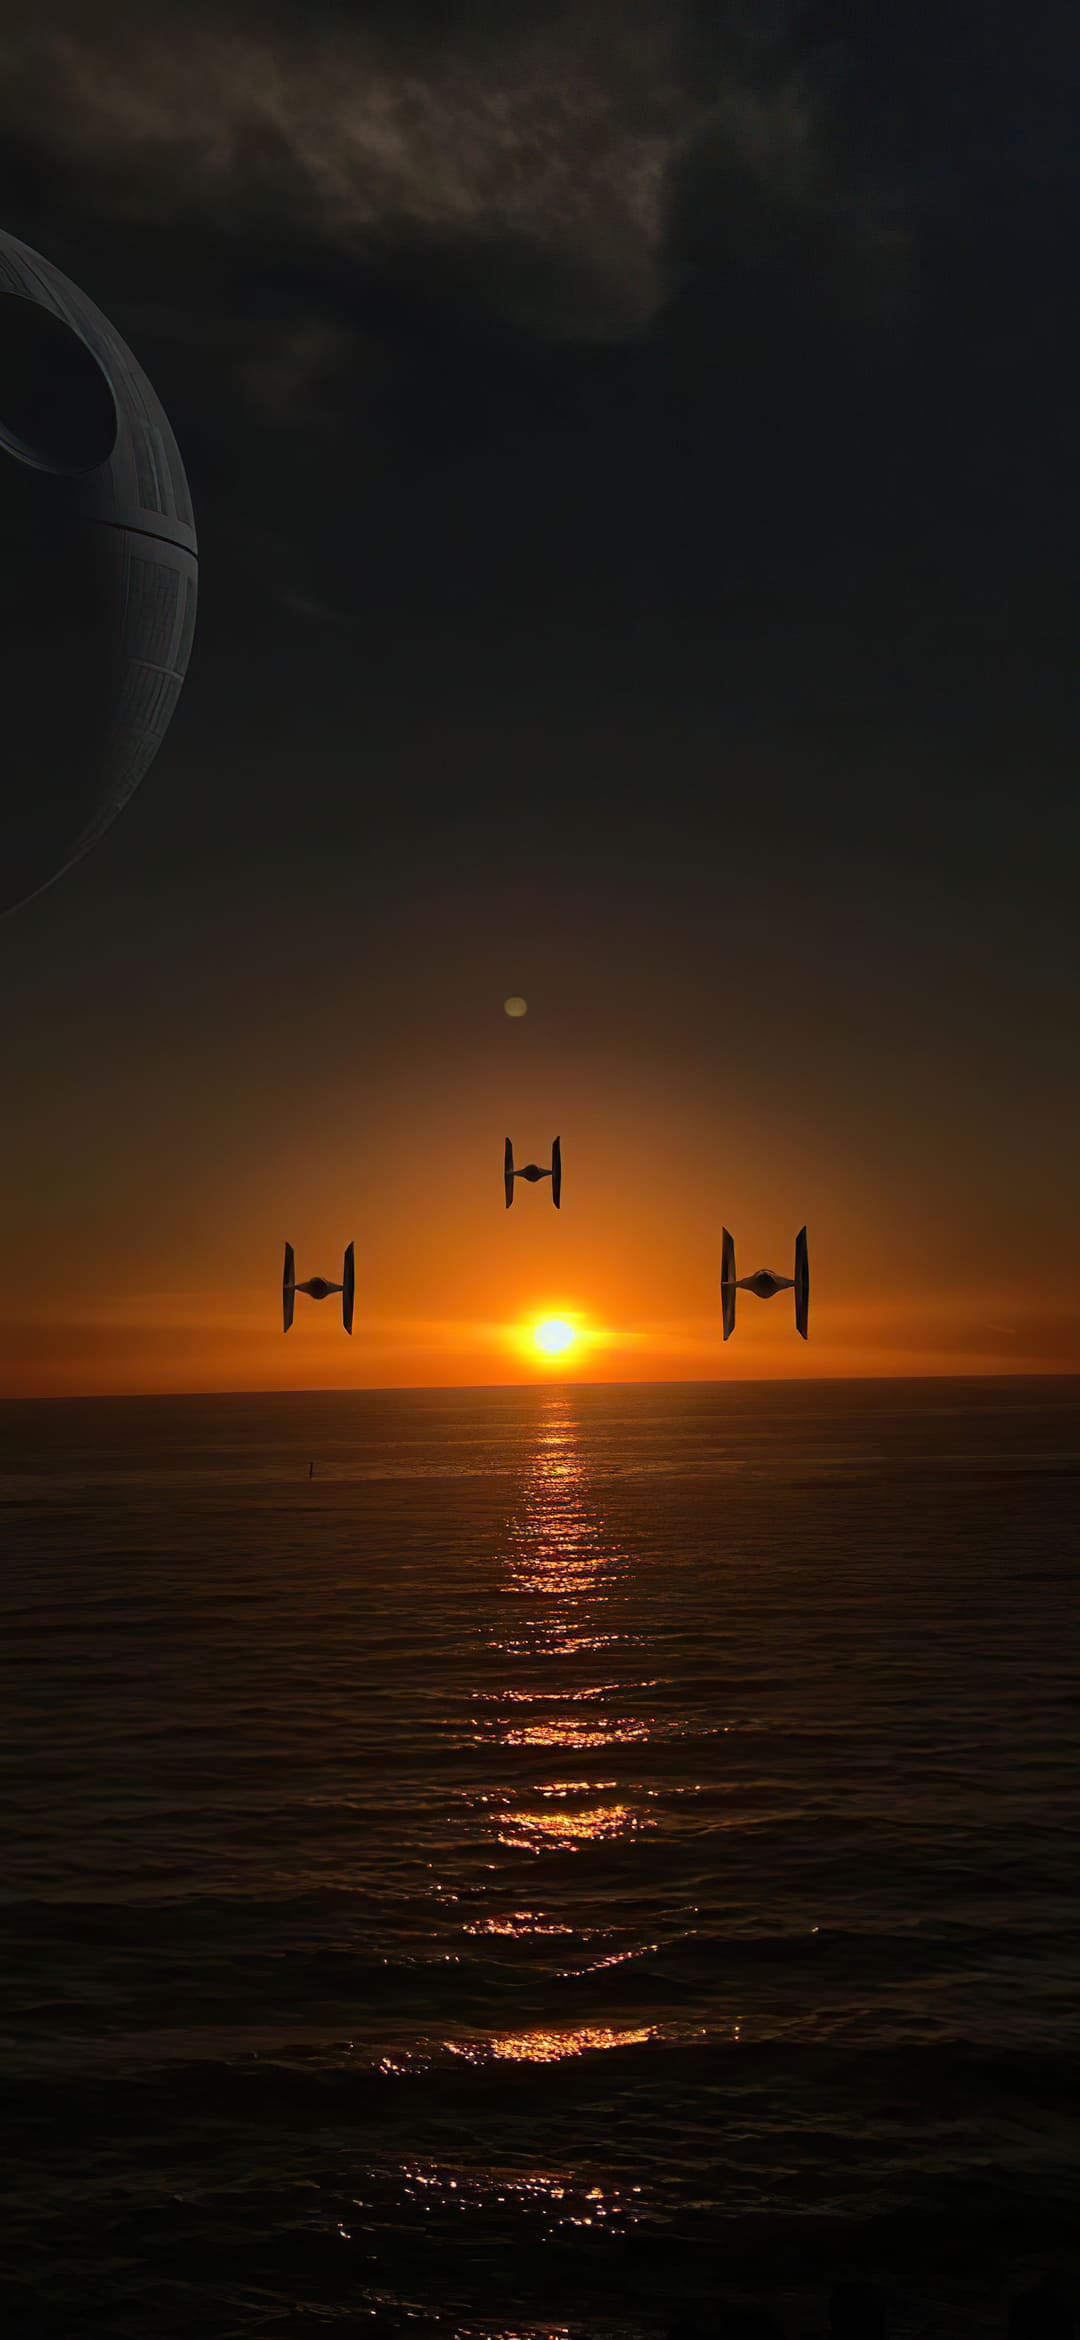 A star wars spaceship flying over the ocean - Star Wars